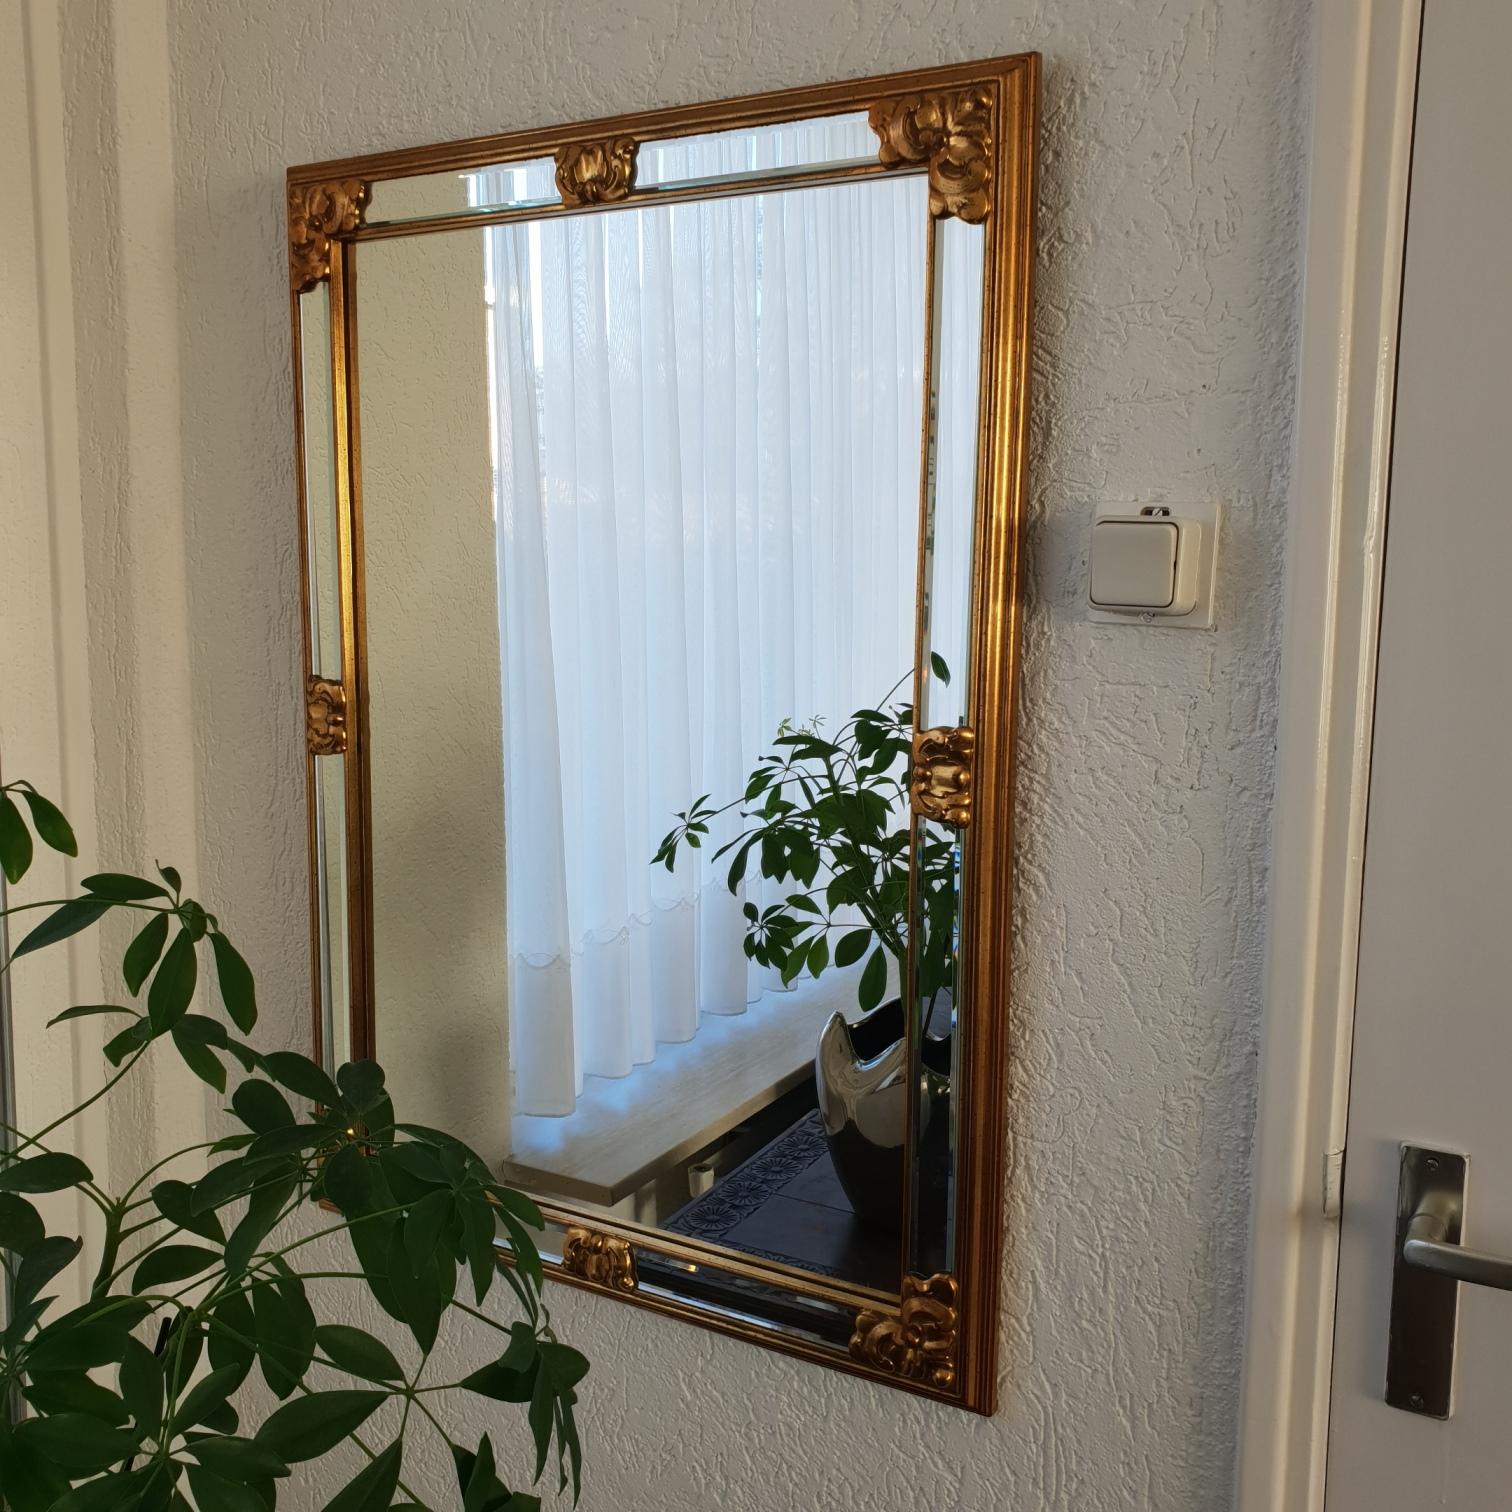 Gold colored mirror by Deknudt, 1970s
Hollywood Regency style.